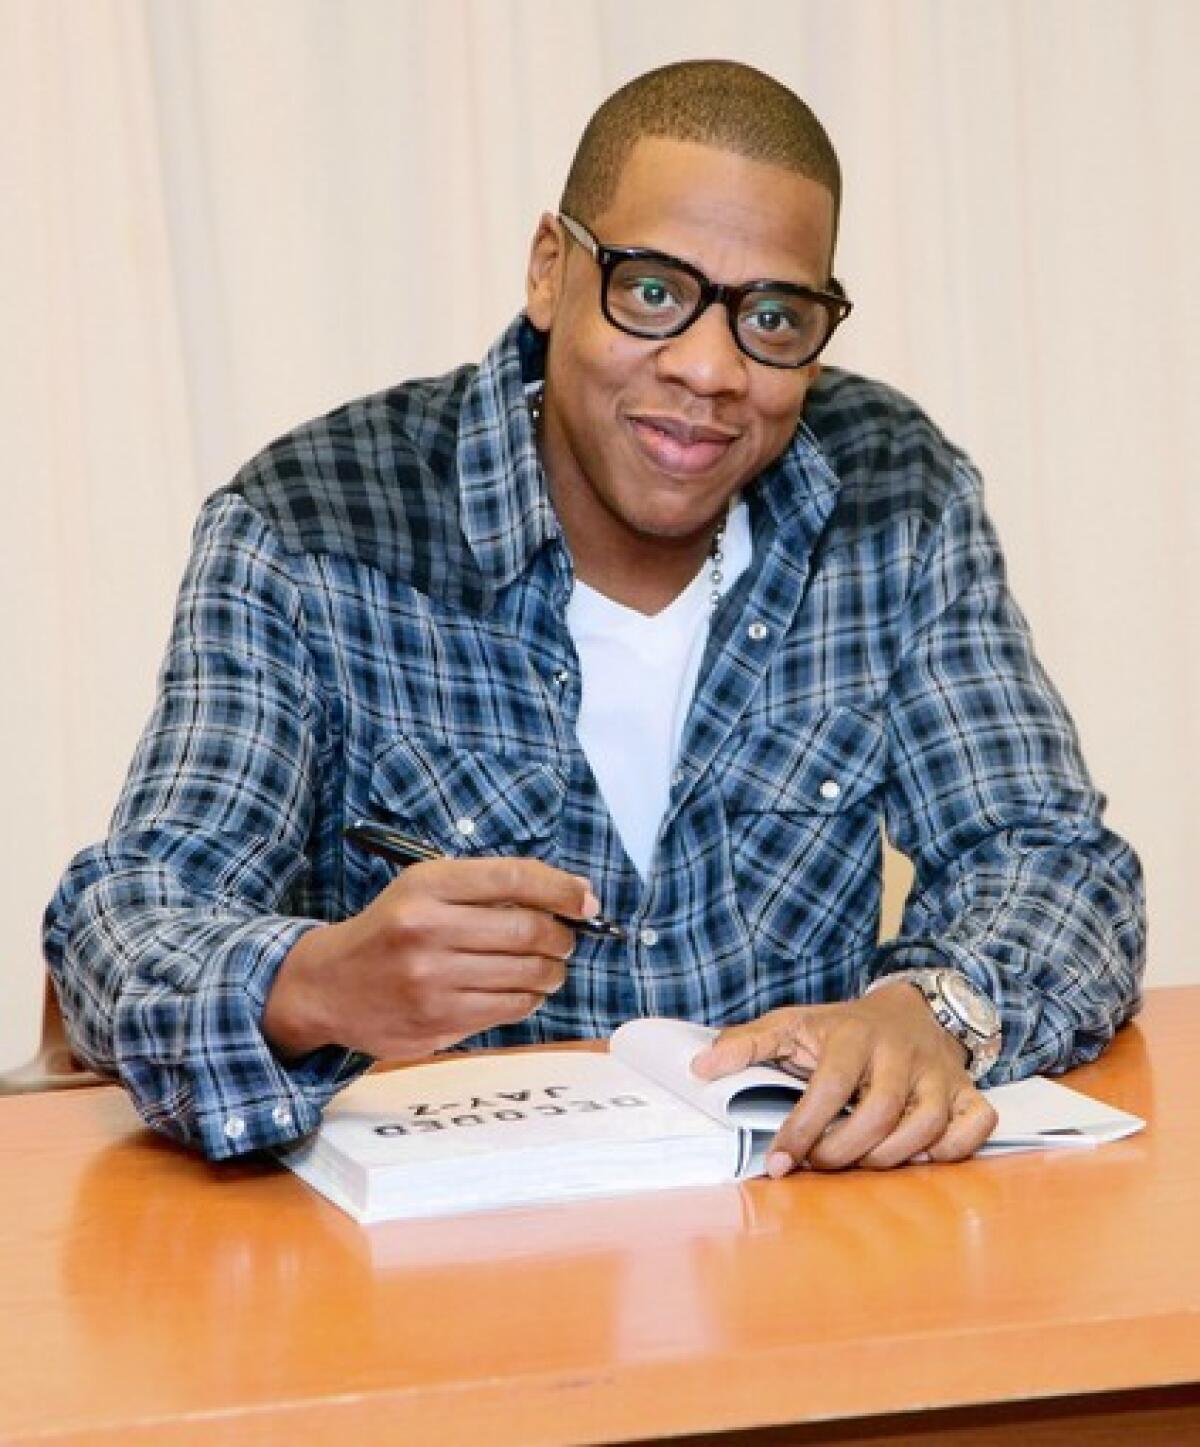 Rapper Jay-Z signs copies of his book "Decoded" in New York last month.